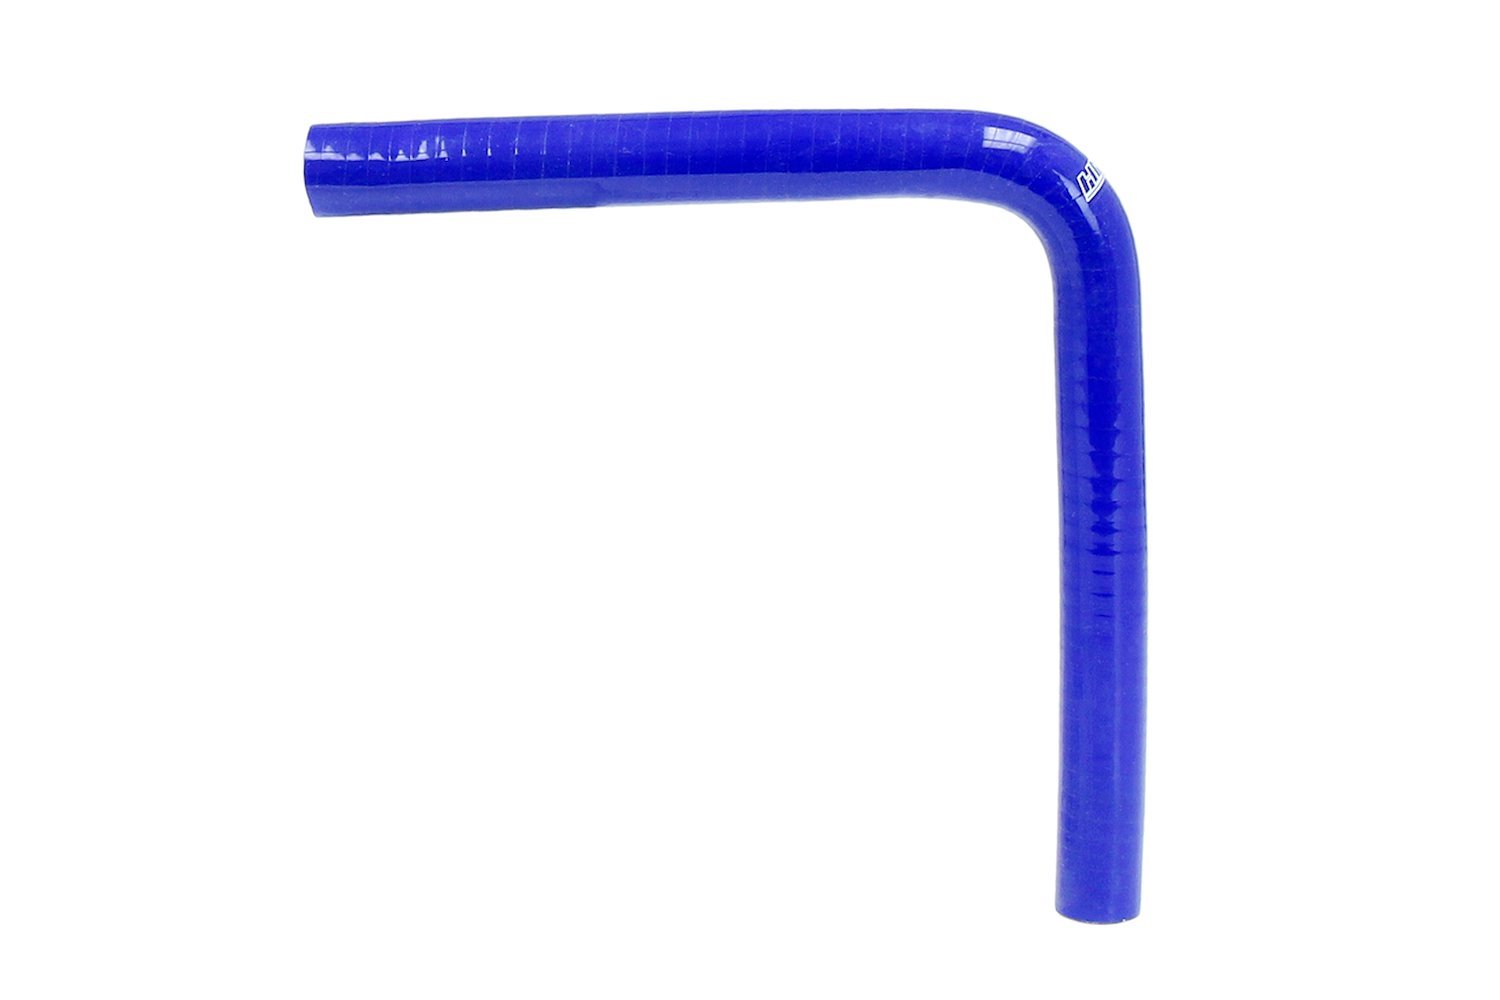 HTSEC90-038-L10-BLUE Silicone 90-Degree Elbow Hose, High-Temp 4-Ply Reinforced, 3/8 in. ID, 10 in. Leg, Blue